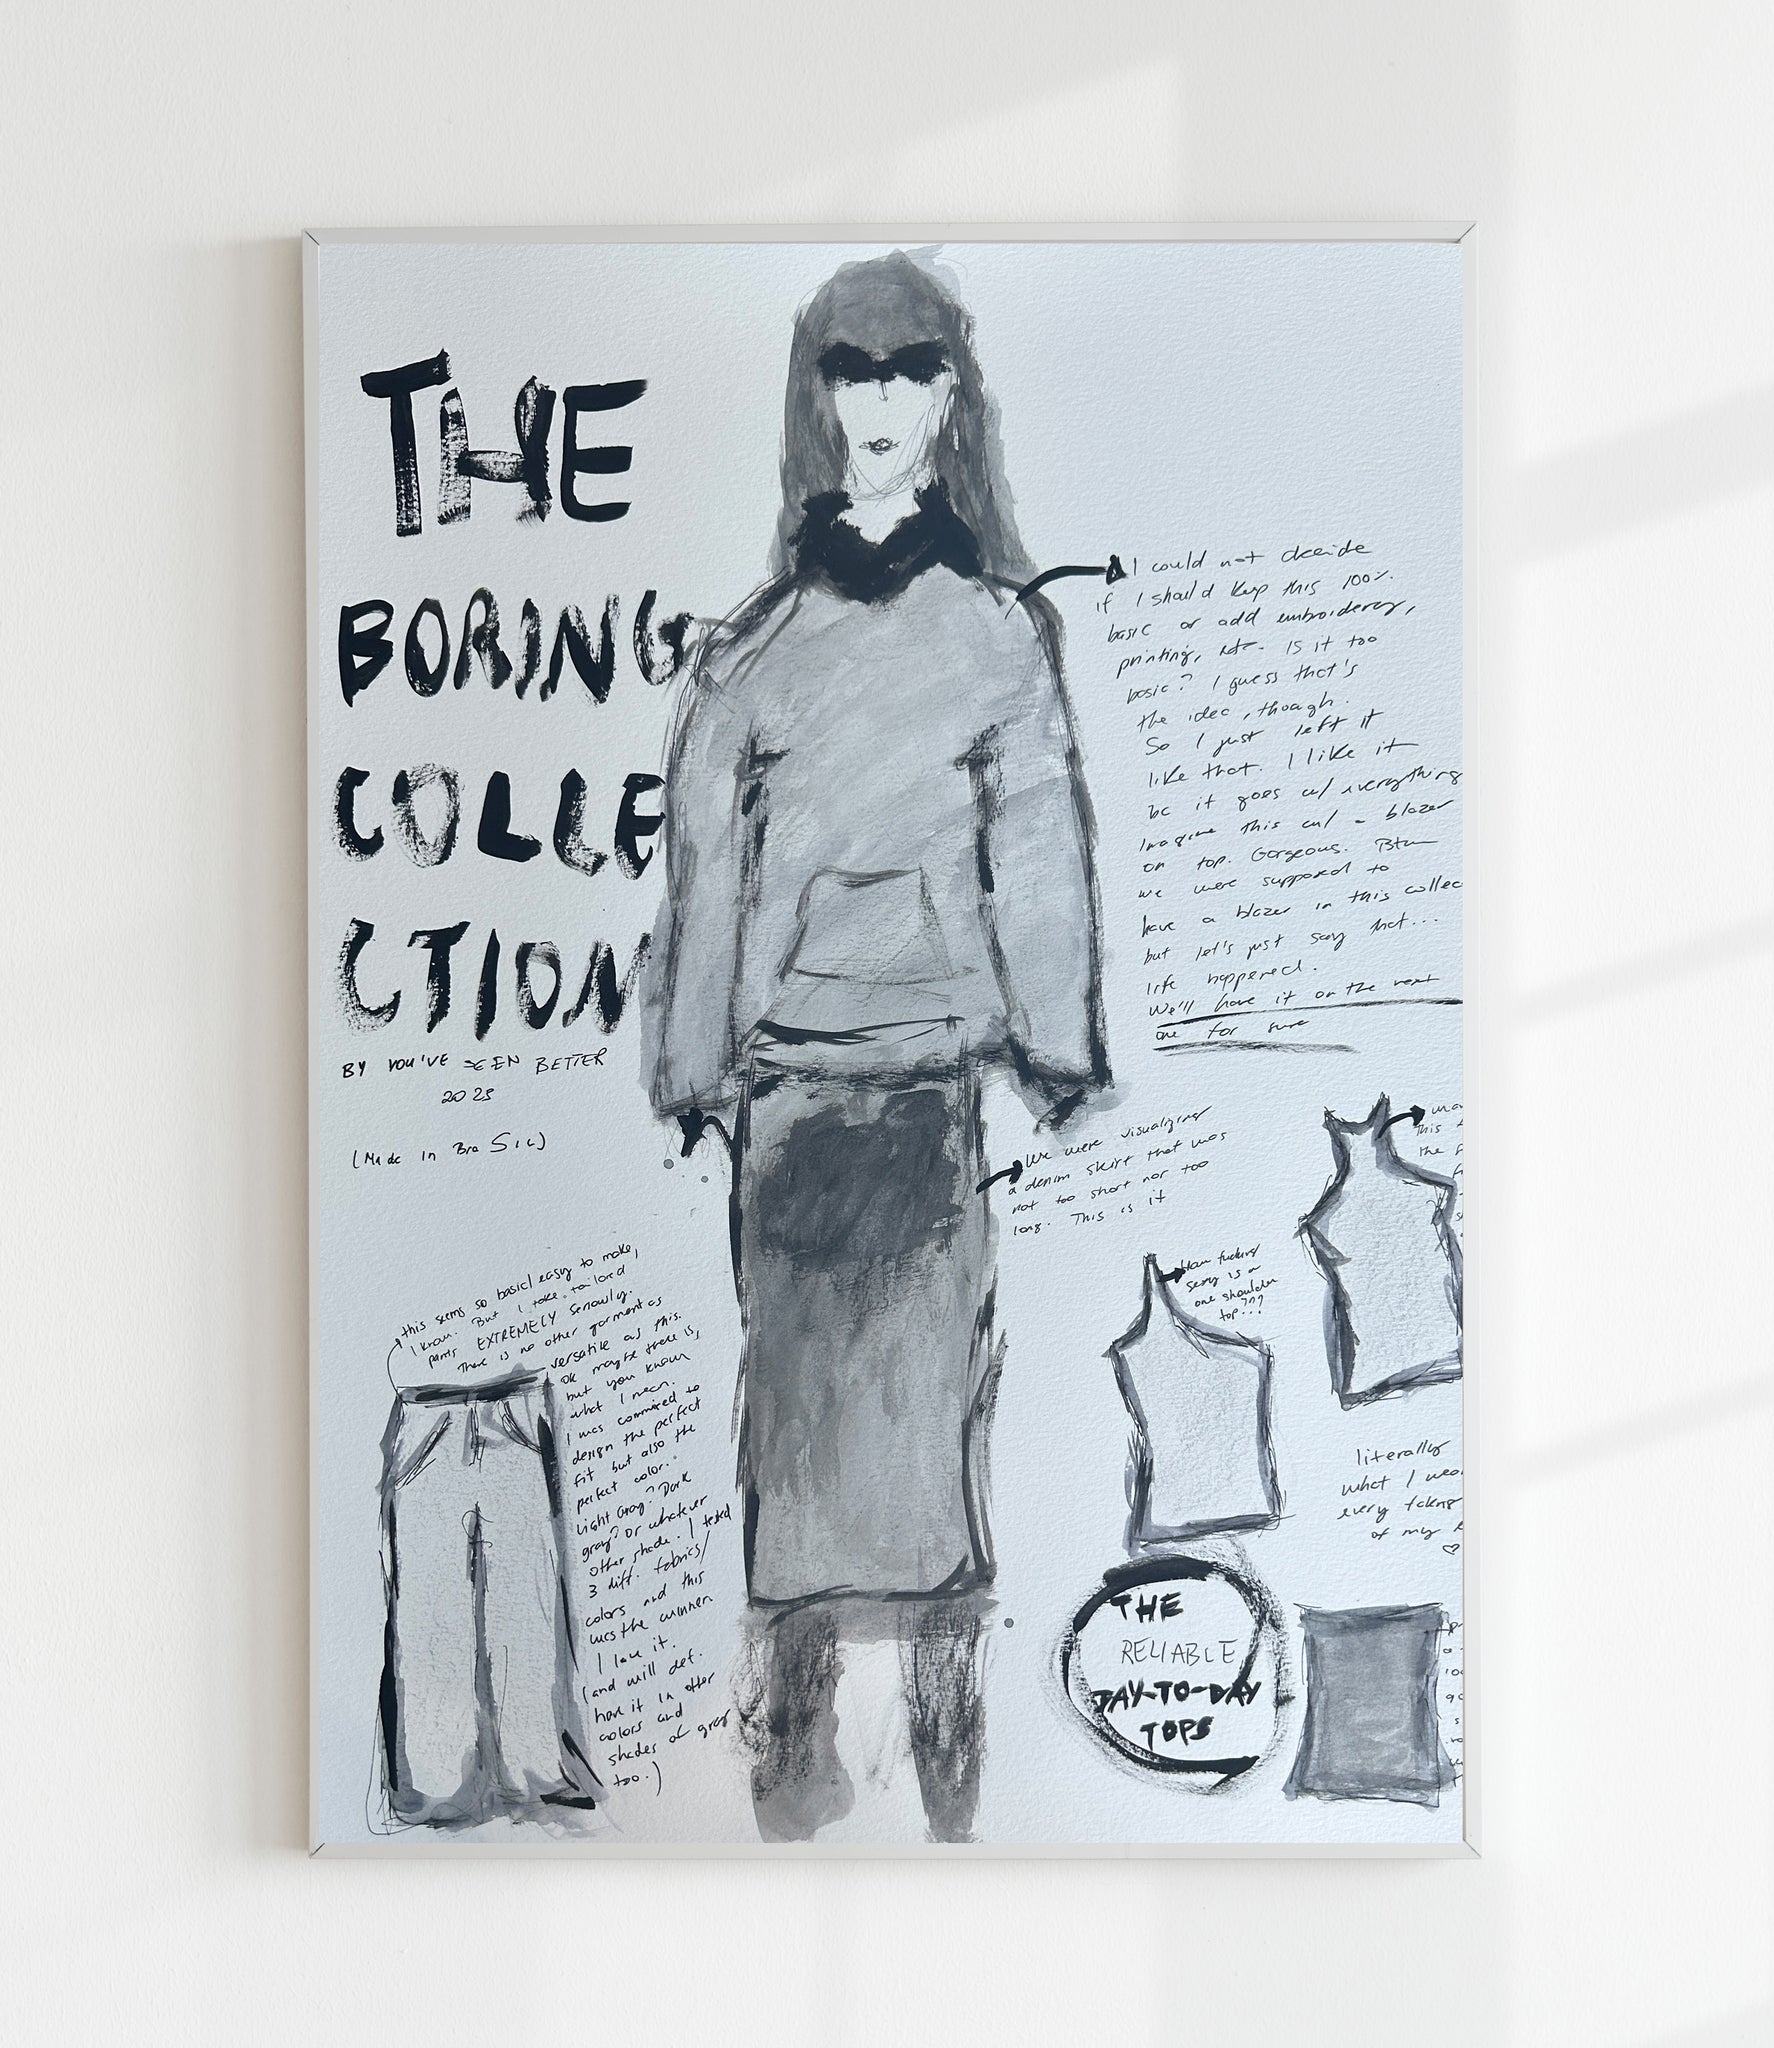 "The Making Of The Boring Collection" Poster